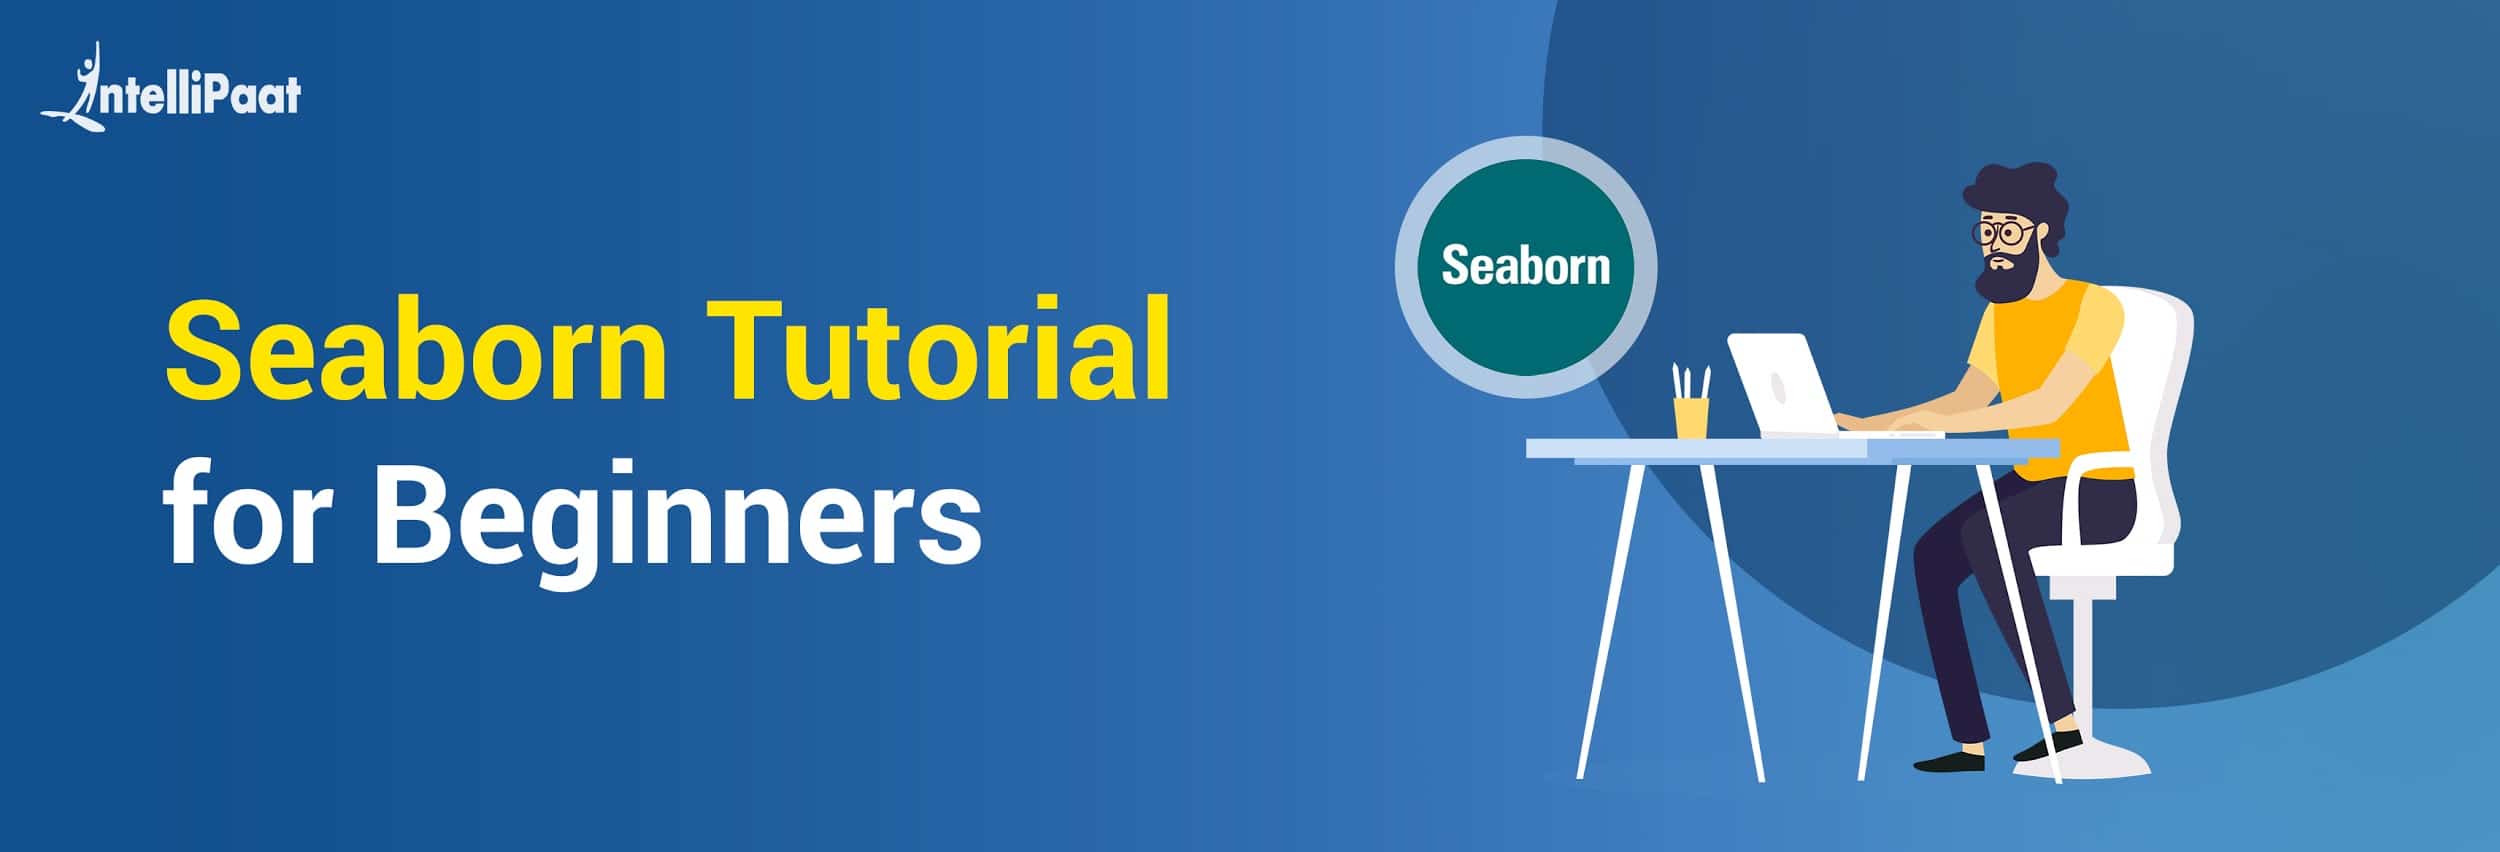 Seaborn Tutorial for Beginners